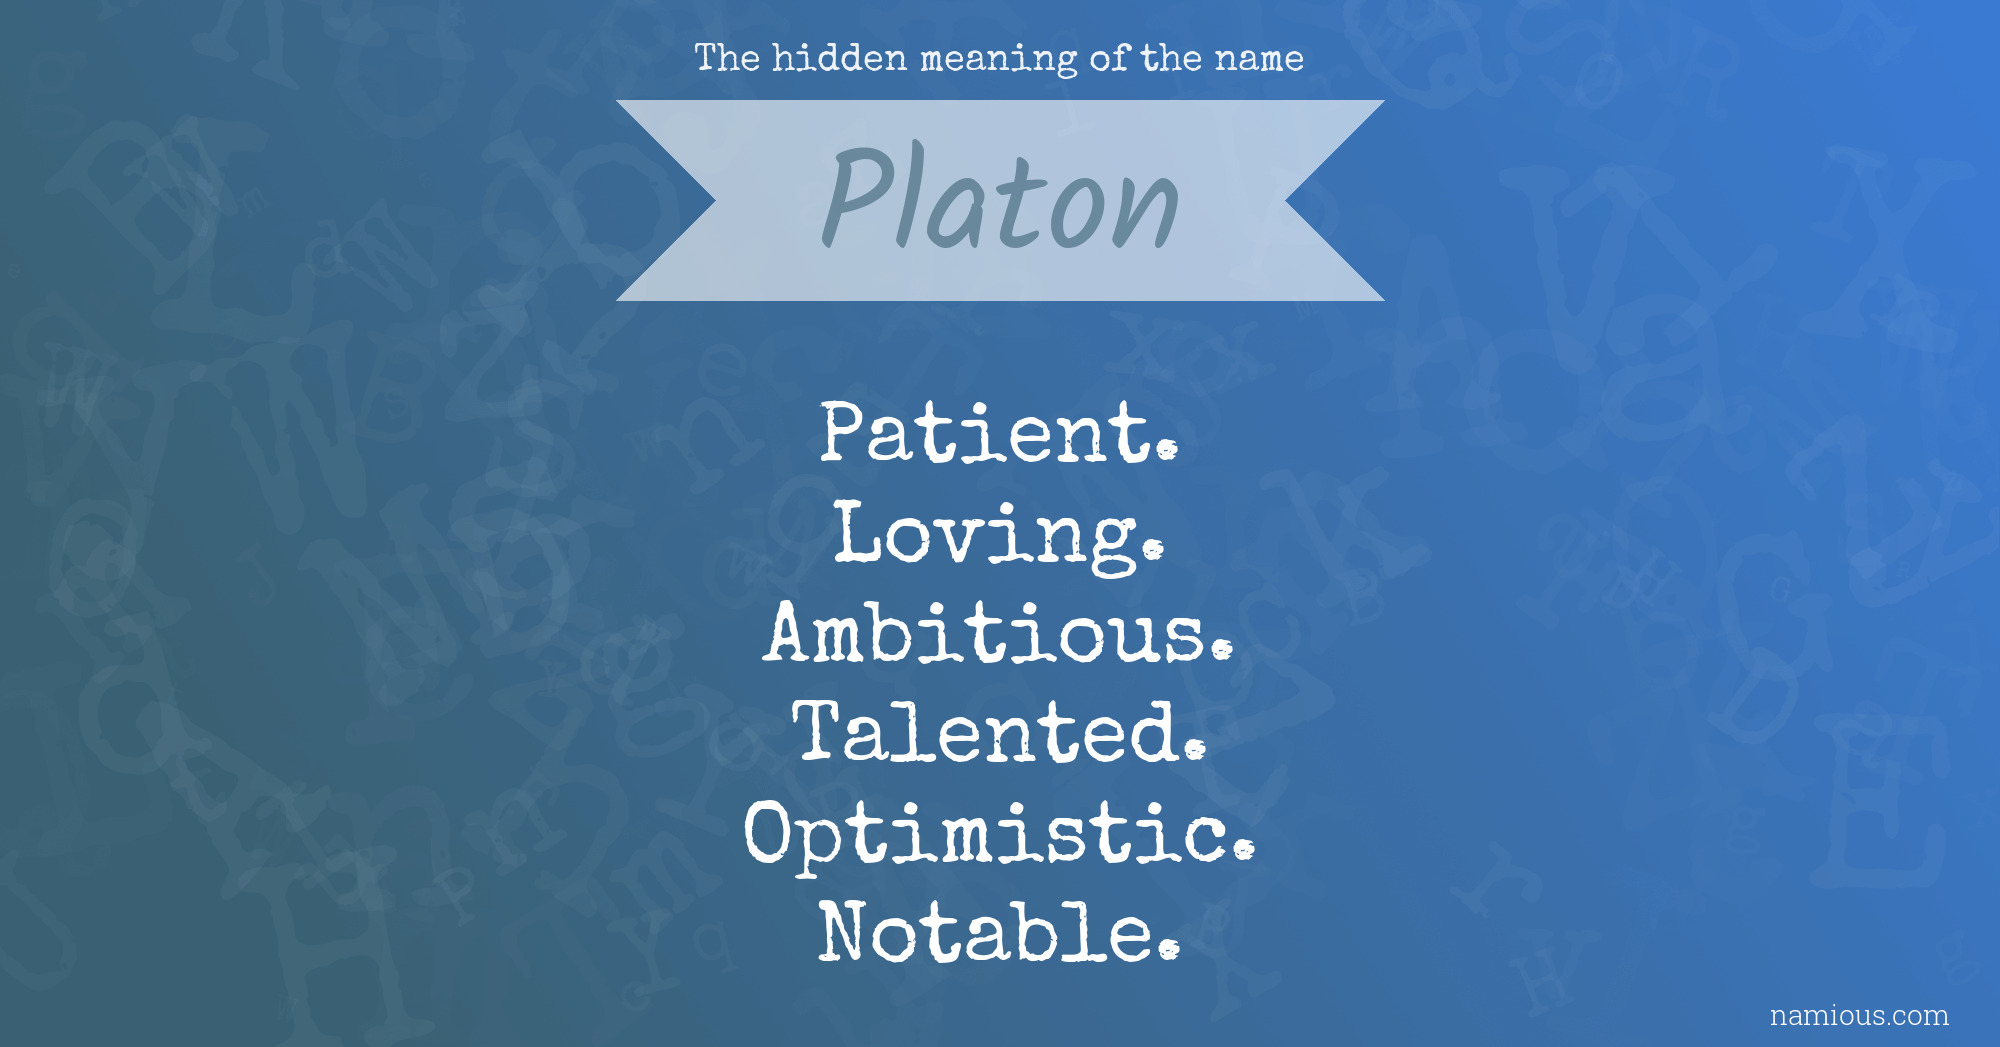 The hidden meaning of the name Platon